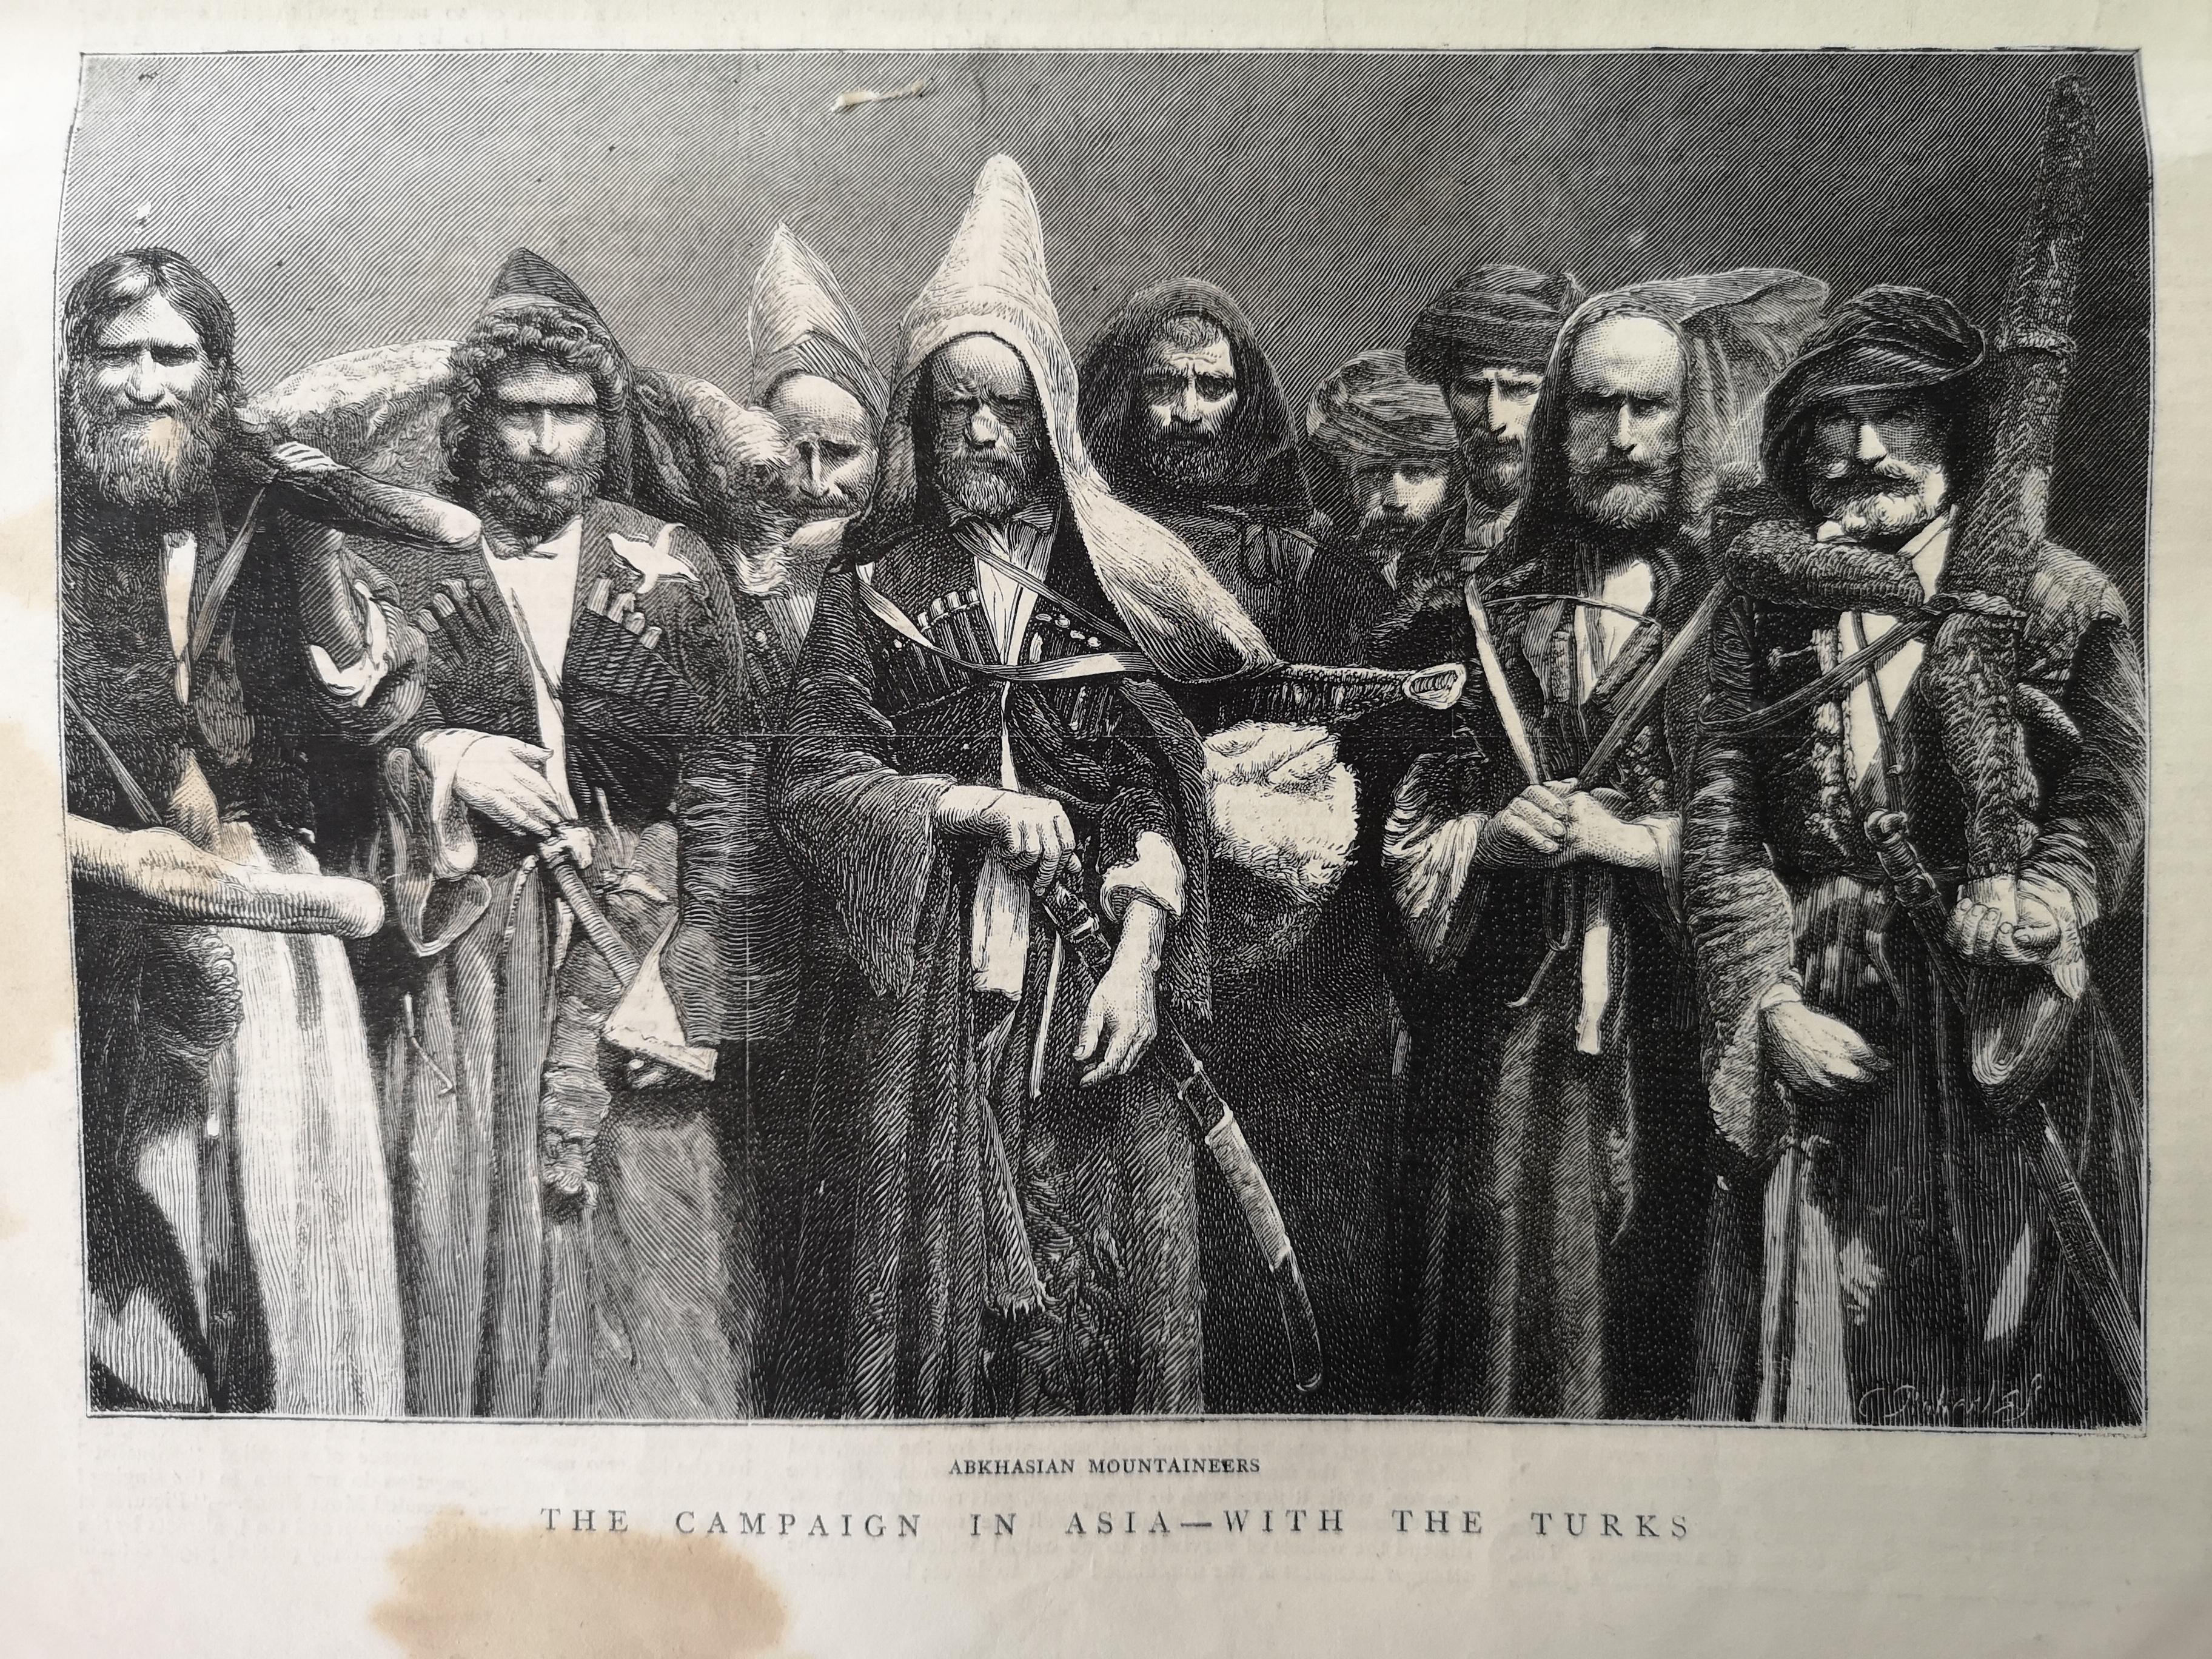 Turks pose for a portrait in a periodical newspaper during the Russo-Turkish War (1877).jpg